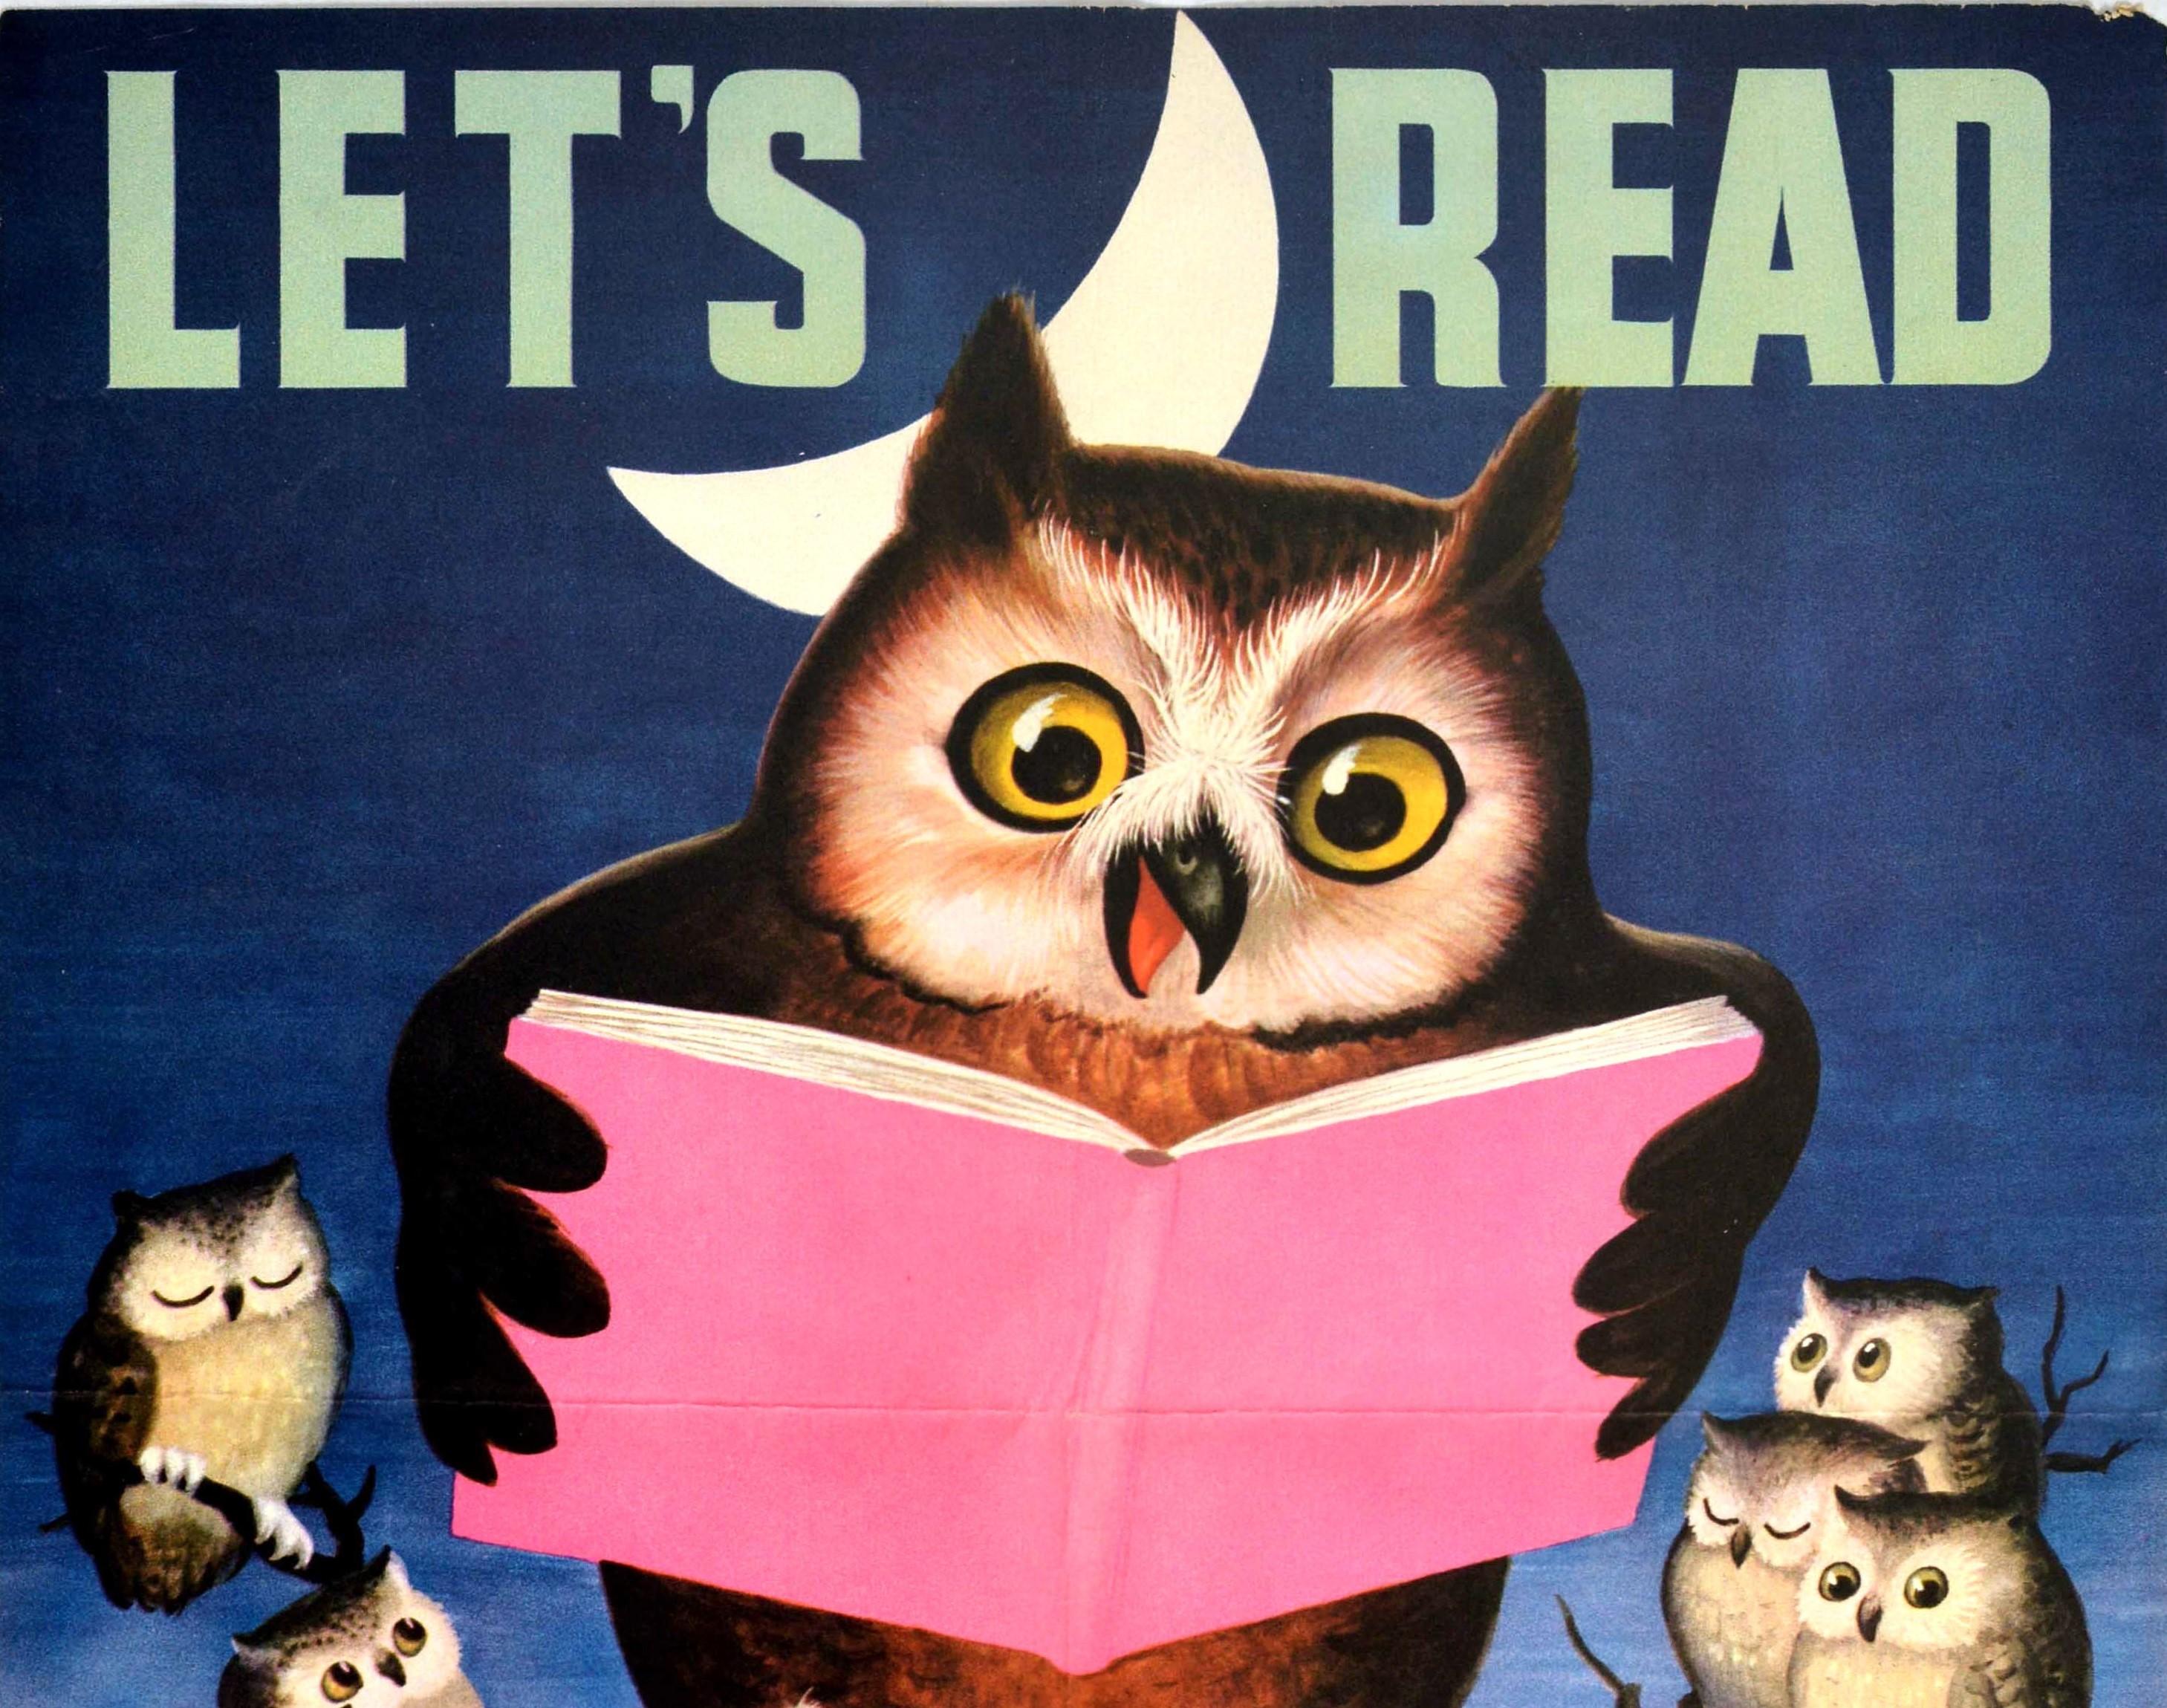 Original vintage educational poster to encourage children to learn to read and enjoy being read to - Let's Read More - published for Book Week November 13-19 featuring a great design depicting a wise old owl reading a book in the evening to owlets